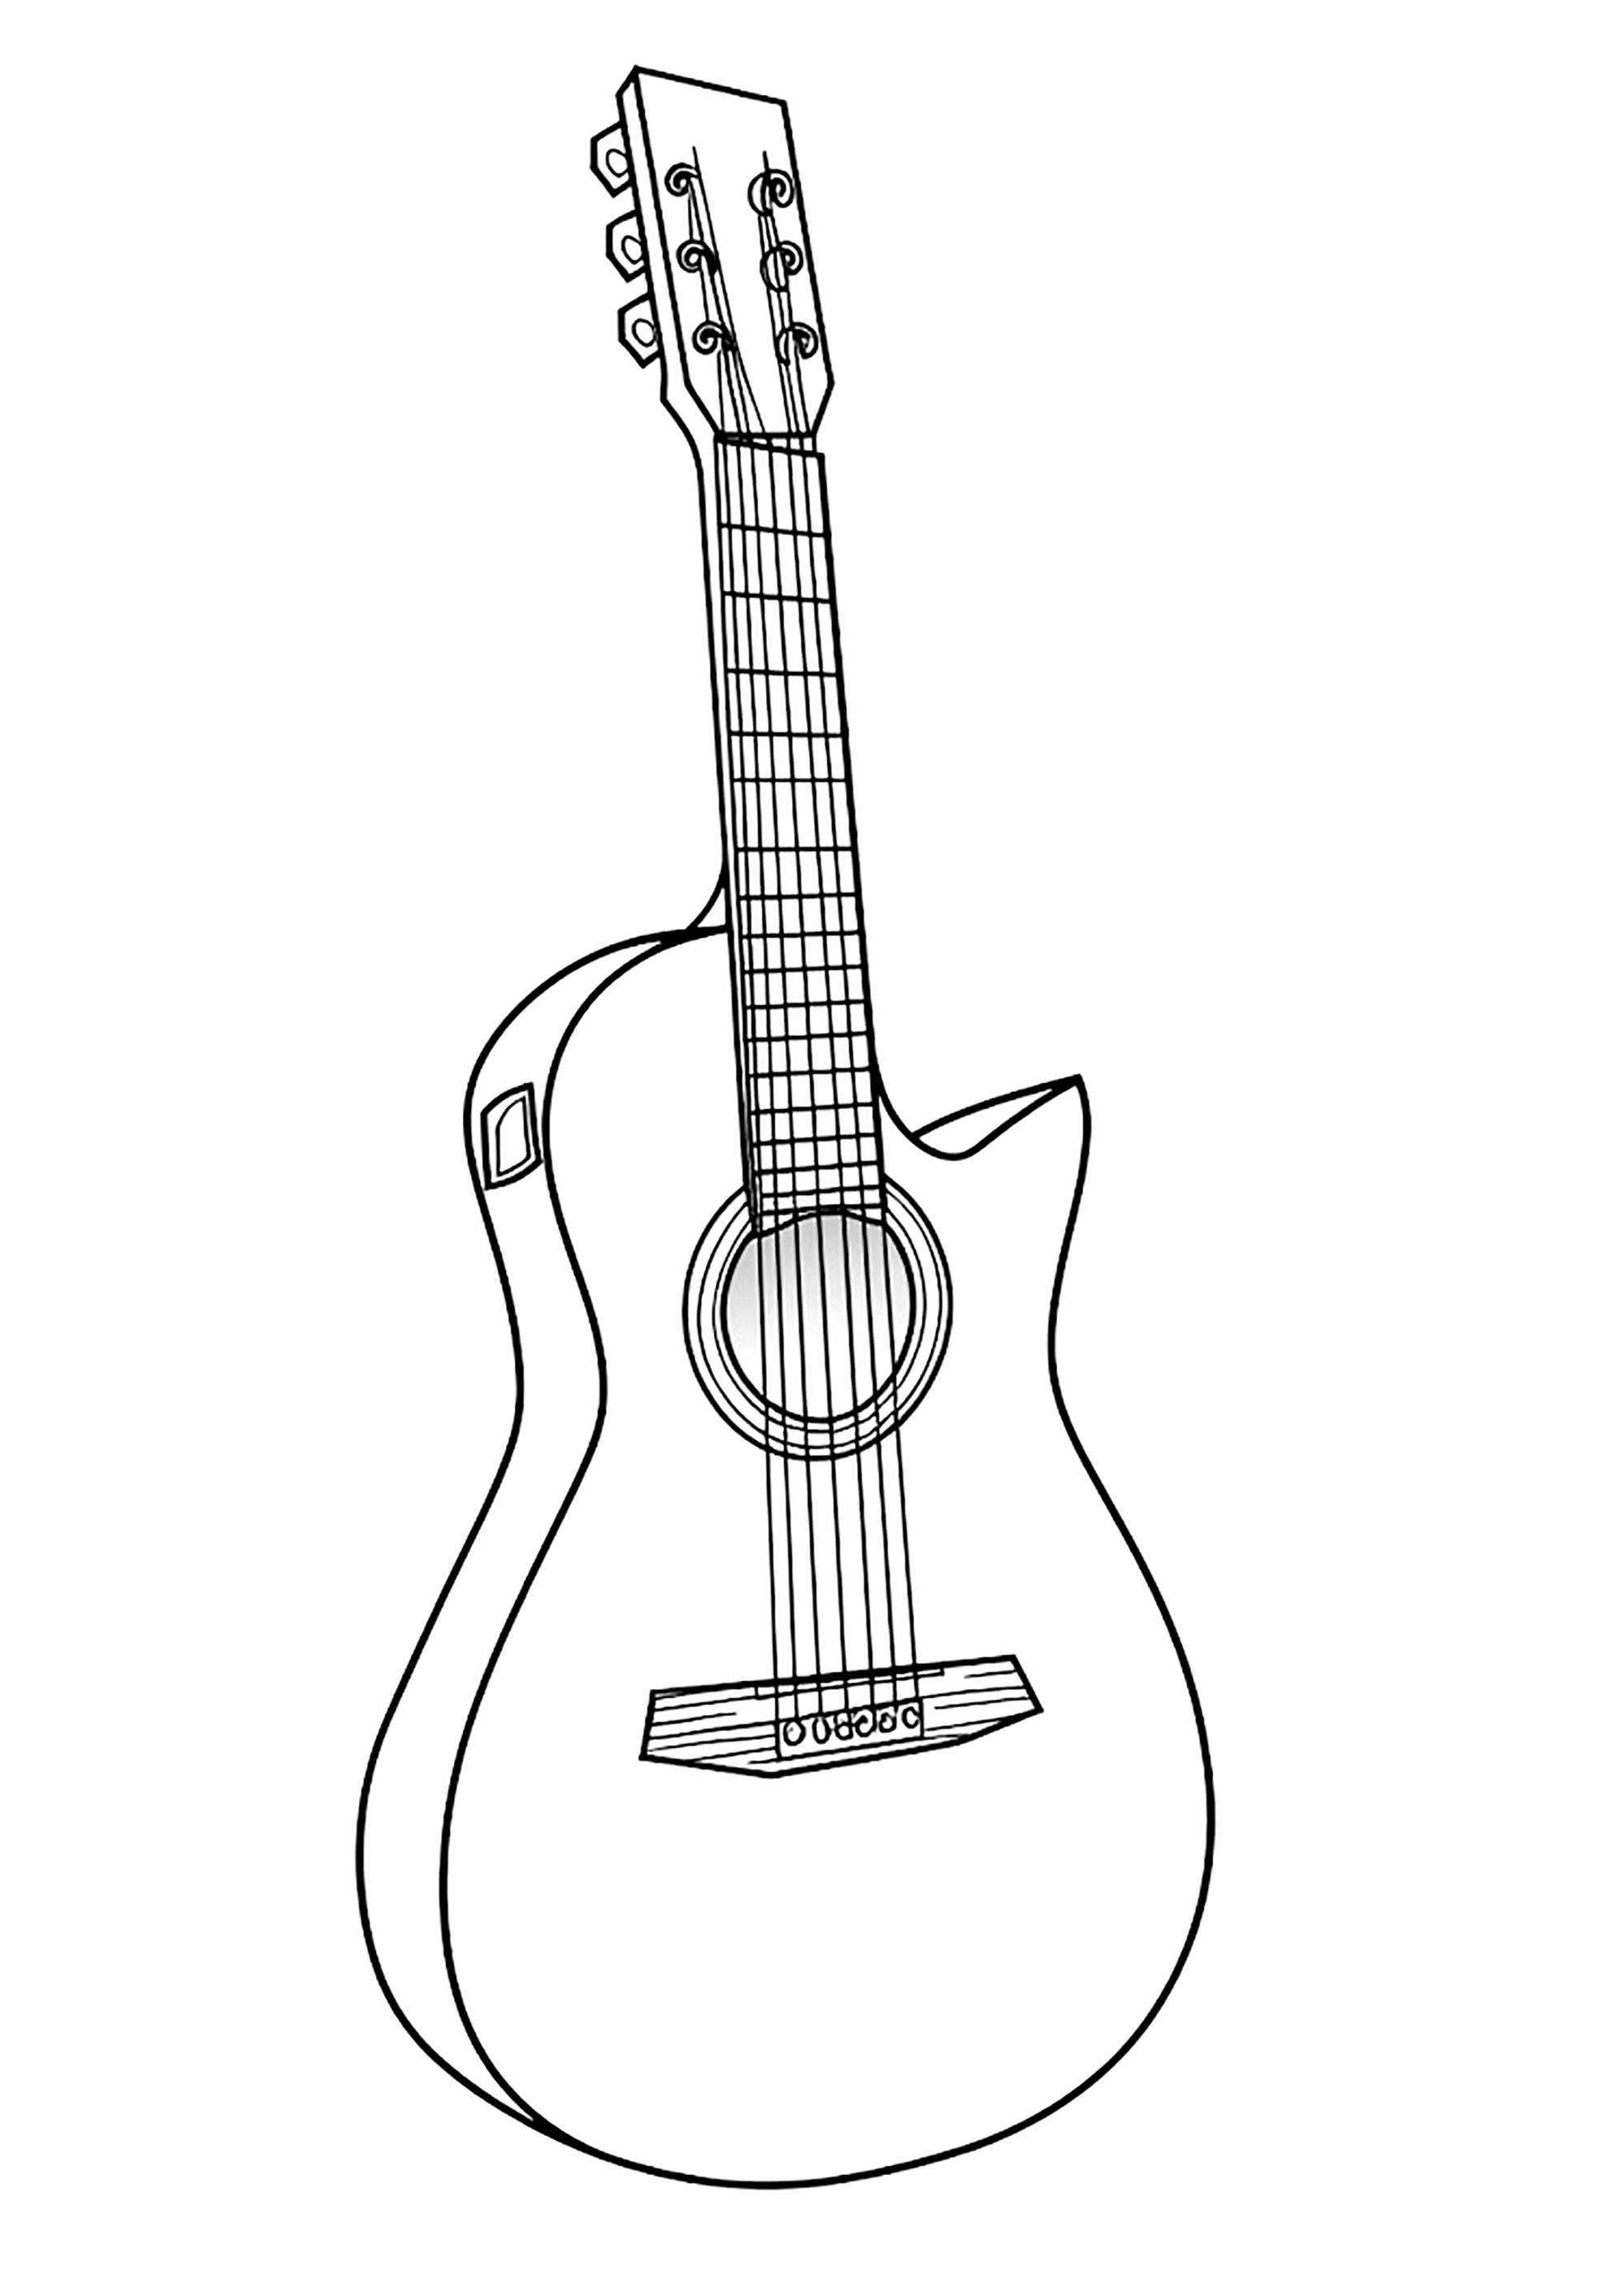 Coloring page of a guitar seen in perspective